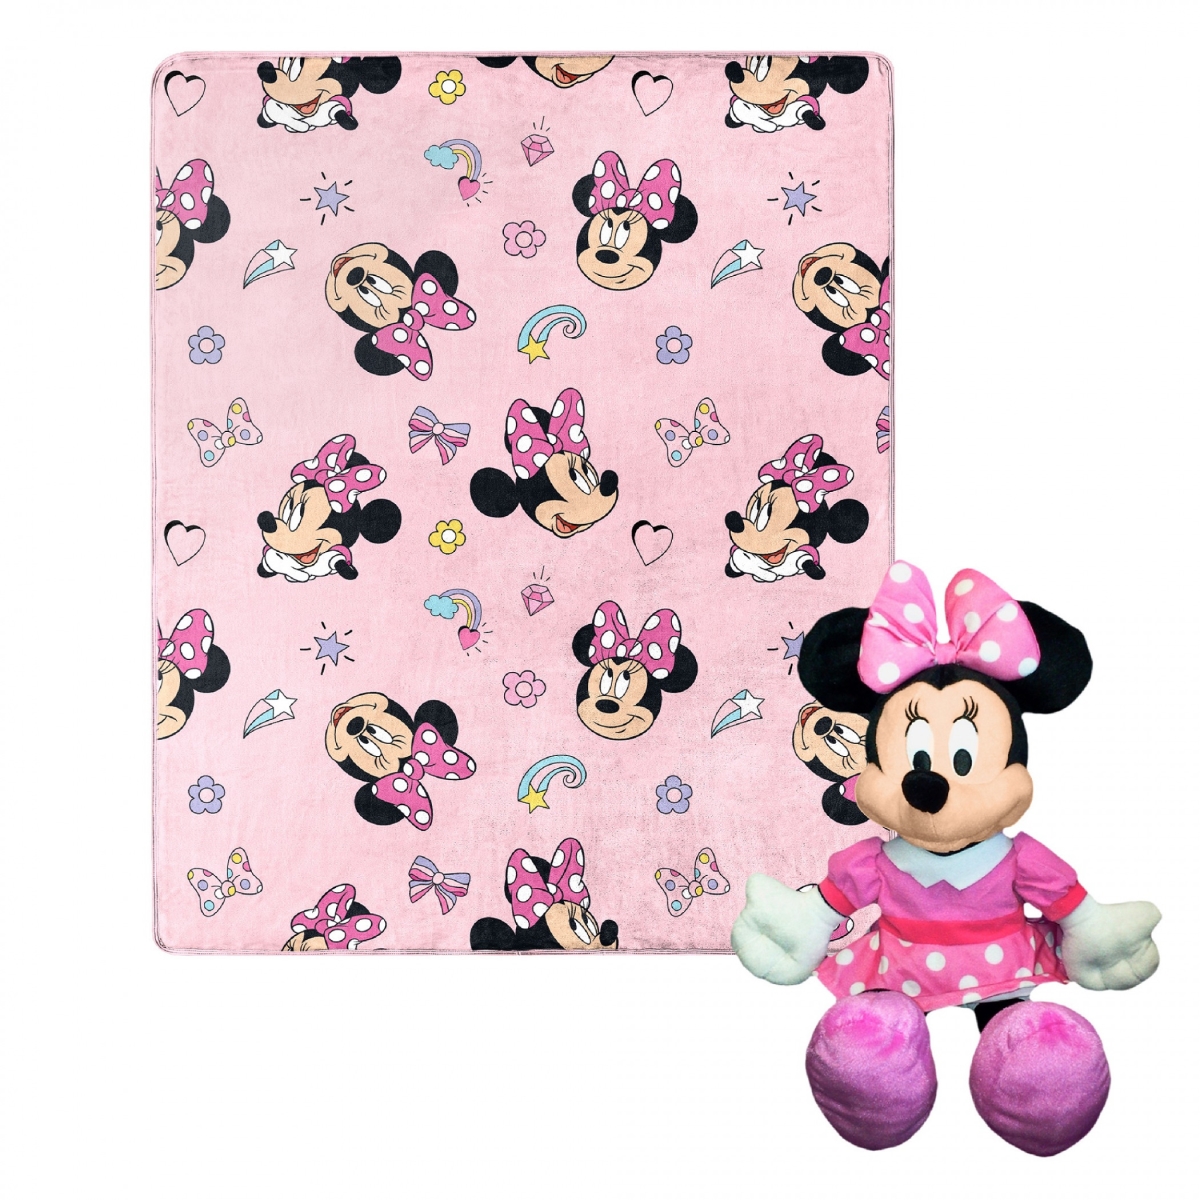 Disney 823753 Disney Minnie Mouse Favorite Things Silk Touch with Plush Hugger